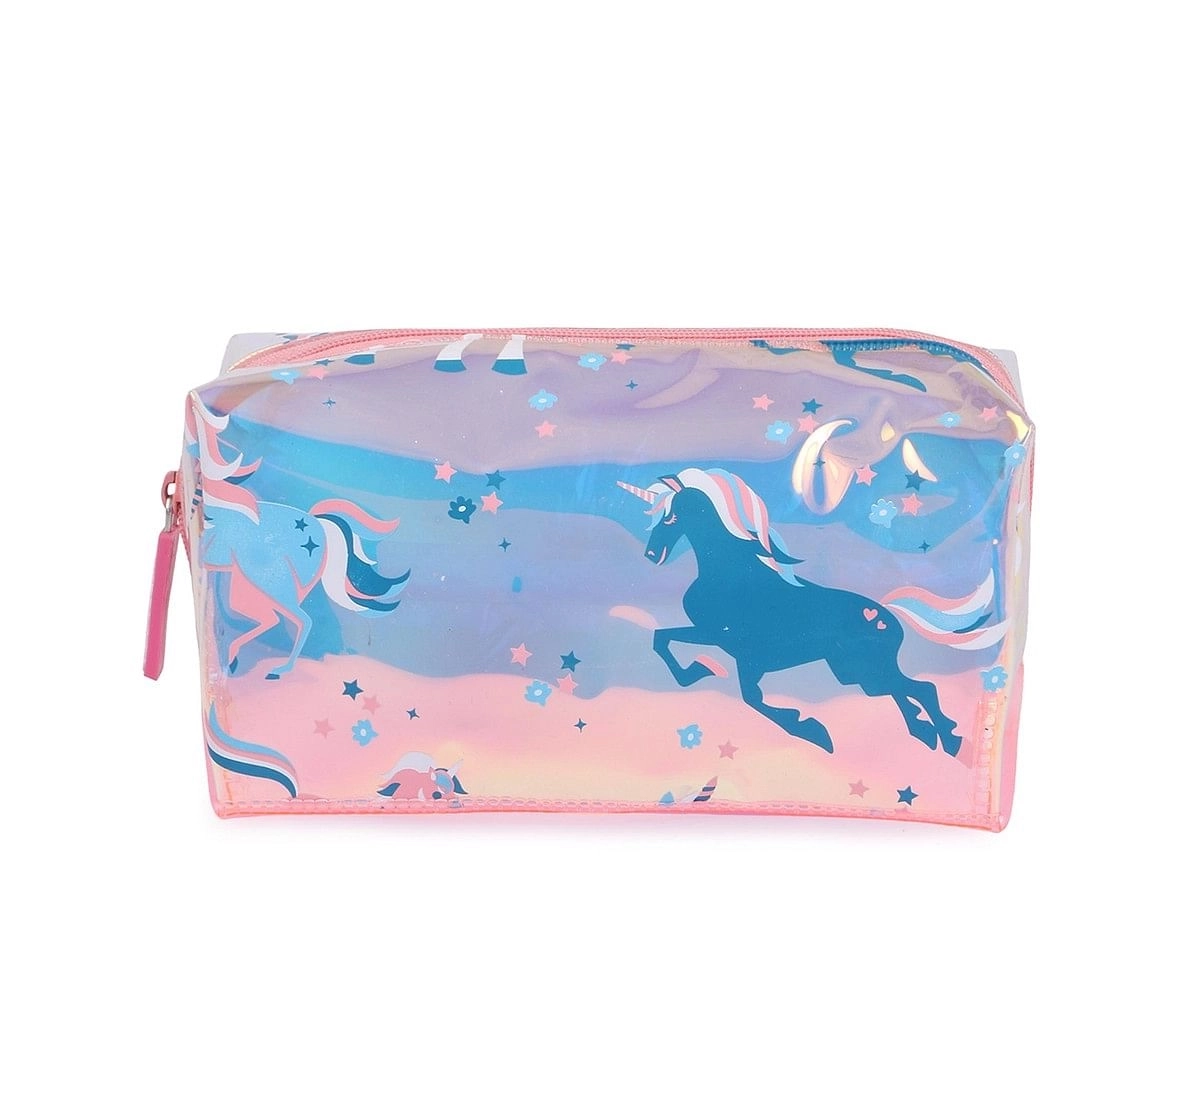 Hamster London Rectanglar Unicorn Pouch for age 3Y+ (Pink)